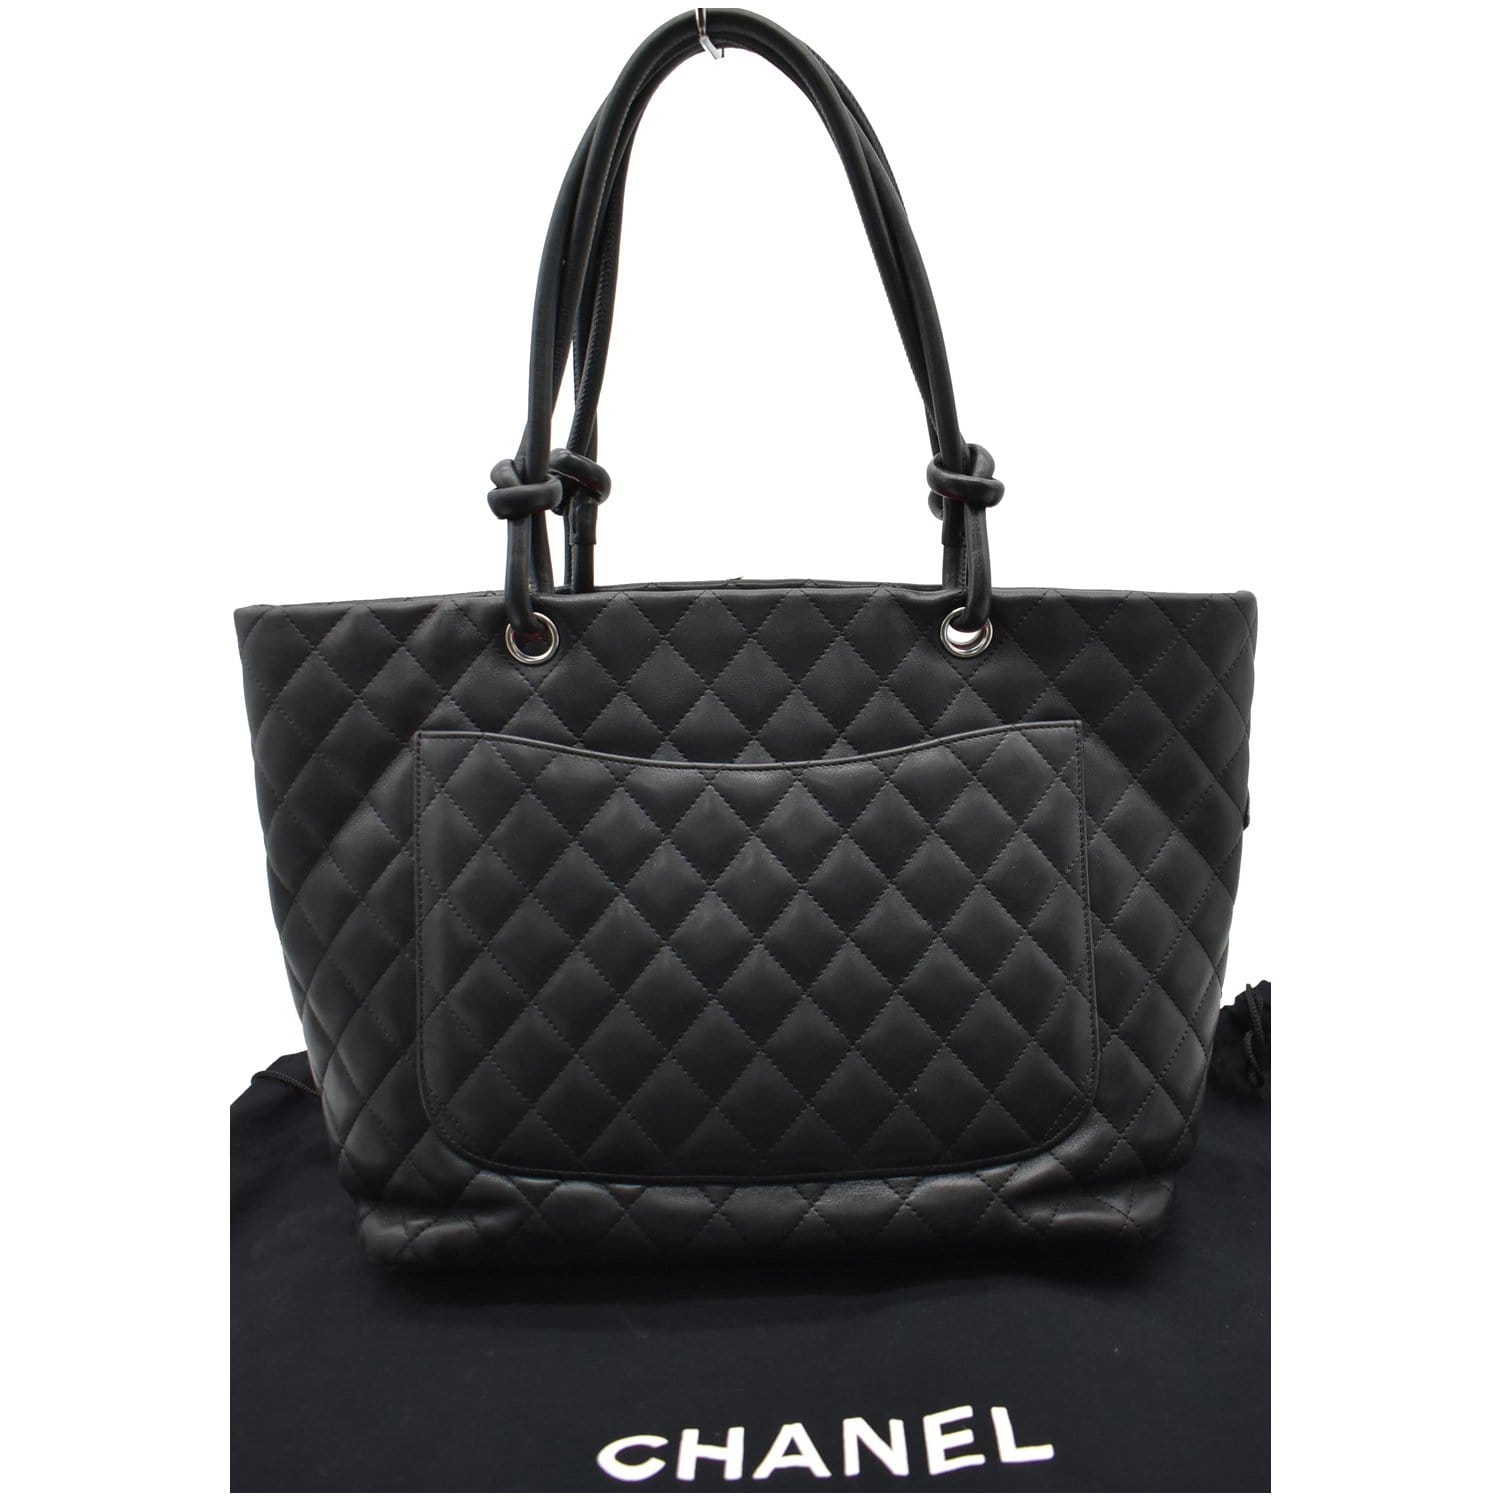 Chanel - Authenticated Cambon Large Rectangle Handbag - Leather Black Plain for Women, Good Condition